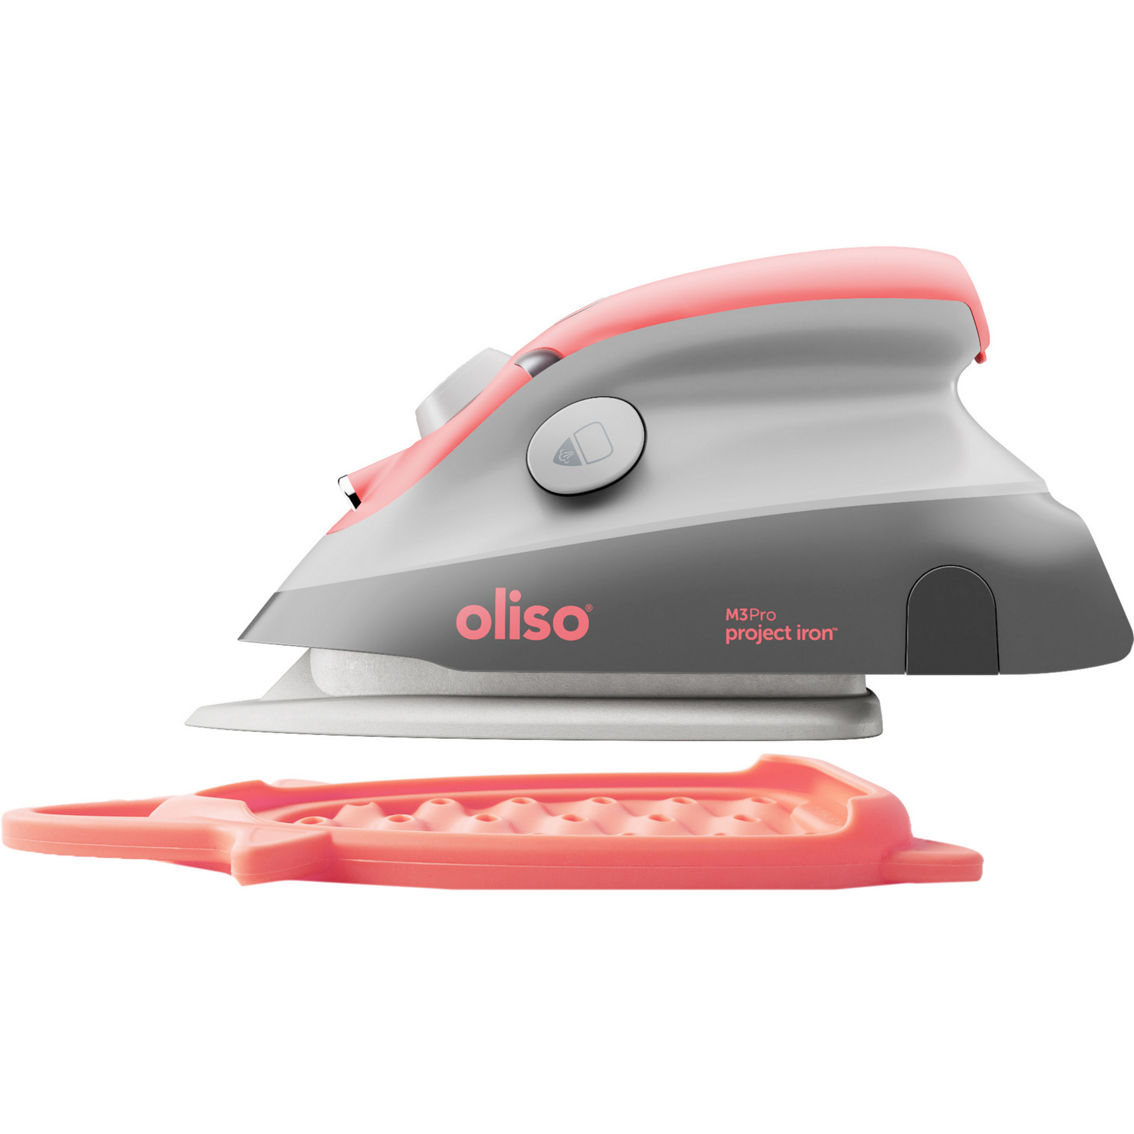 Oliso M3Pro Project Iron with Silicone Trivet - Image 4 of 10